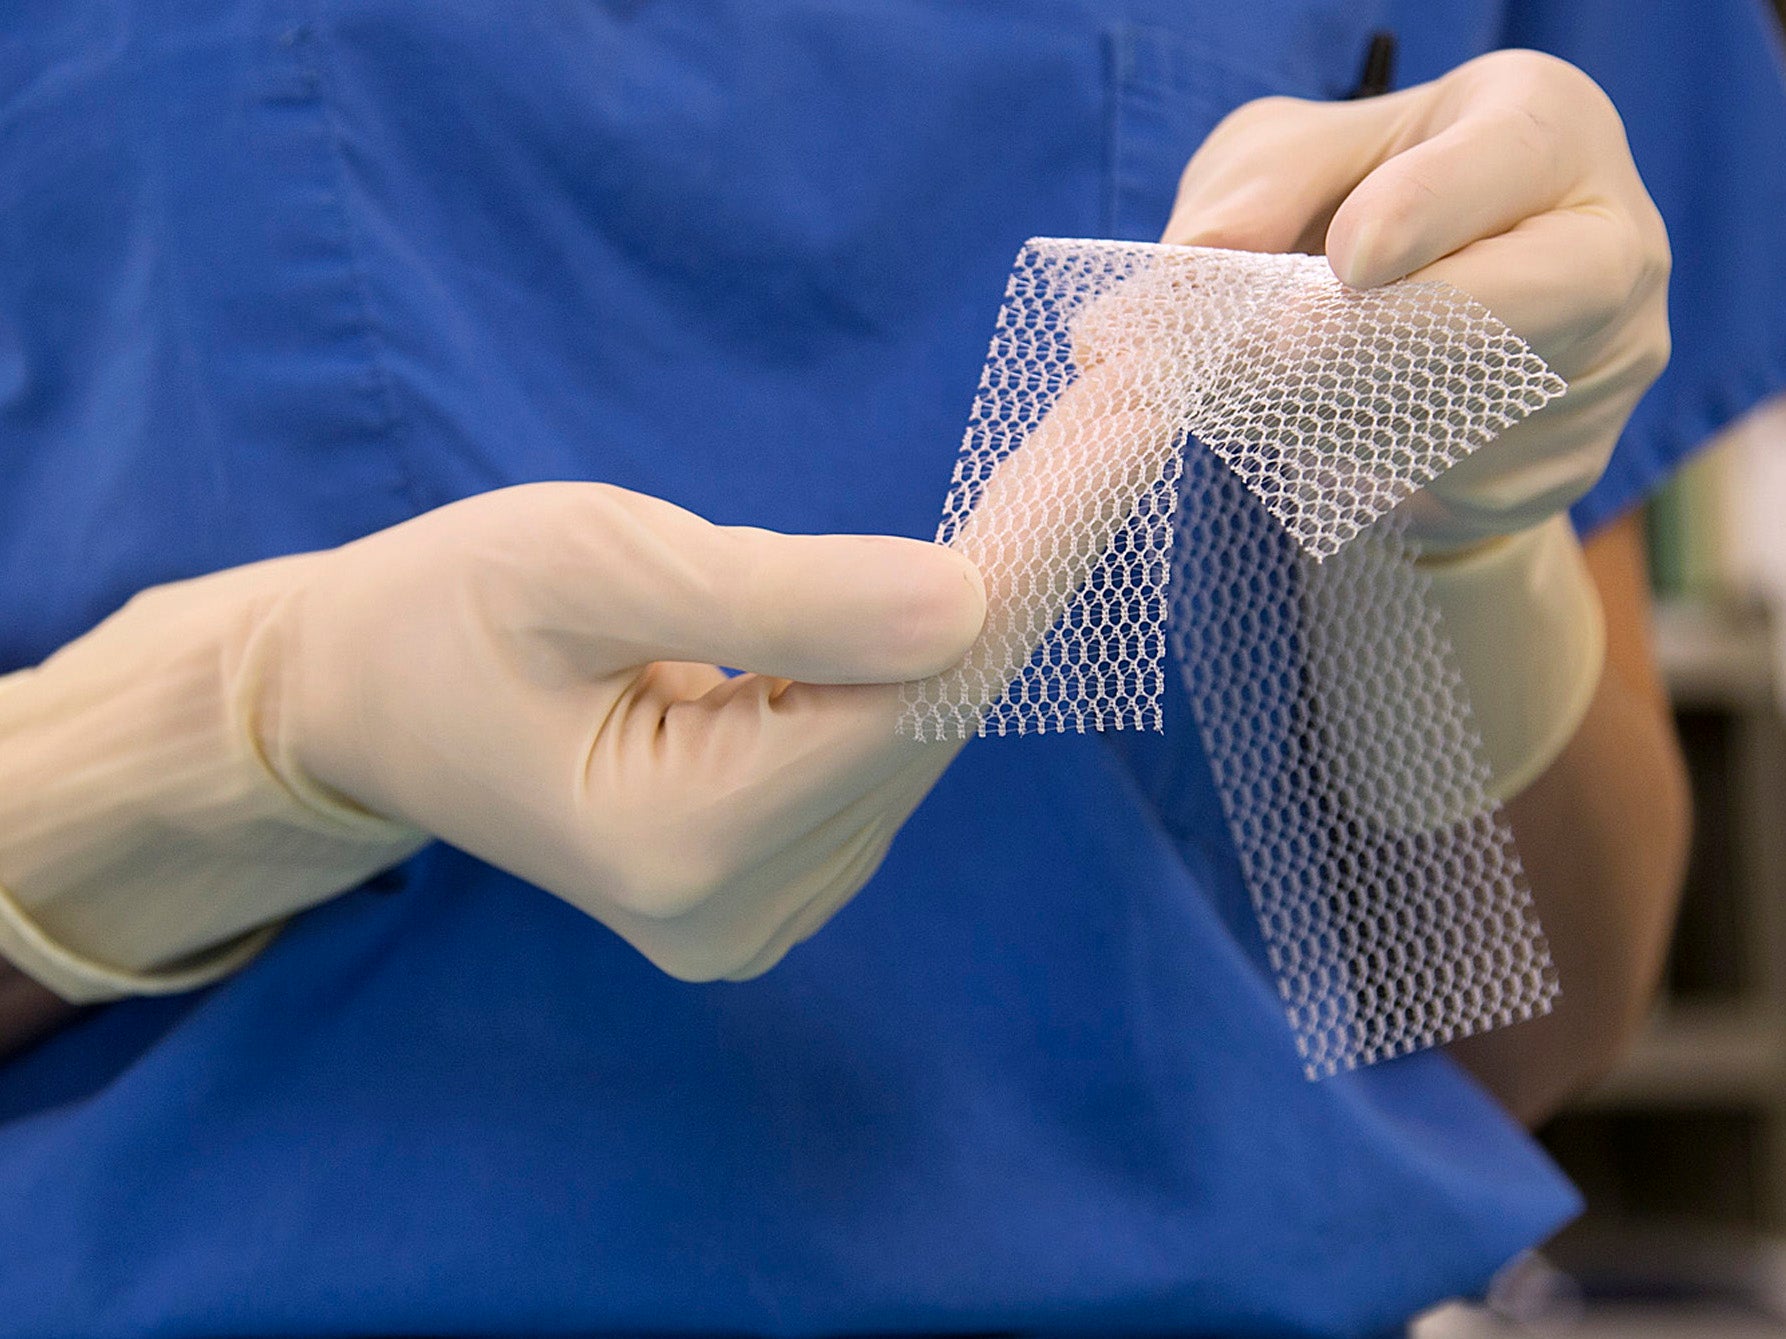 Plastic mesh implants were not tested before being licensed for use in vaginal procedure